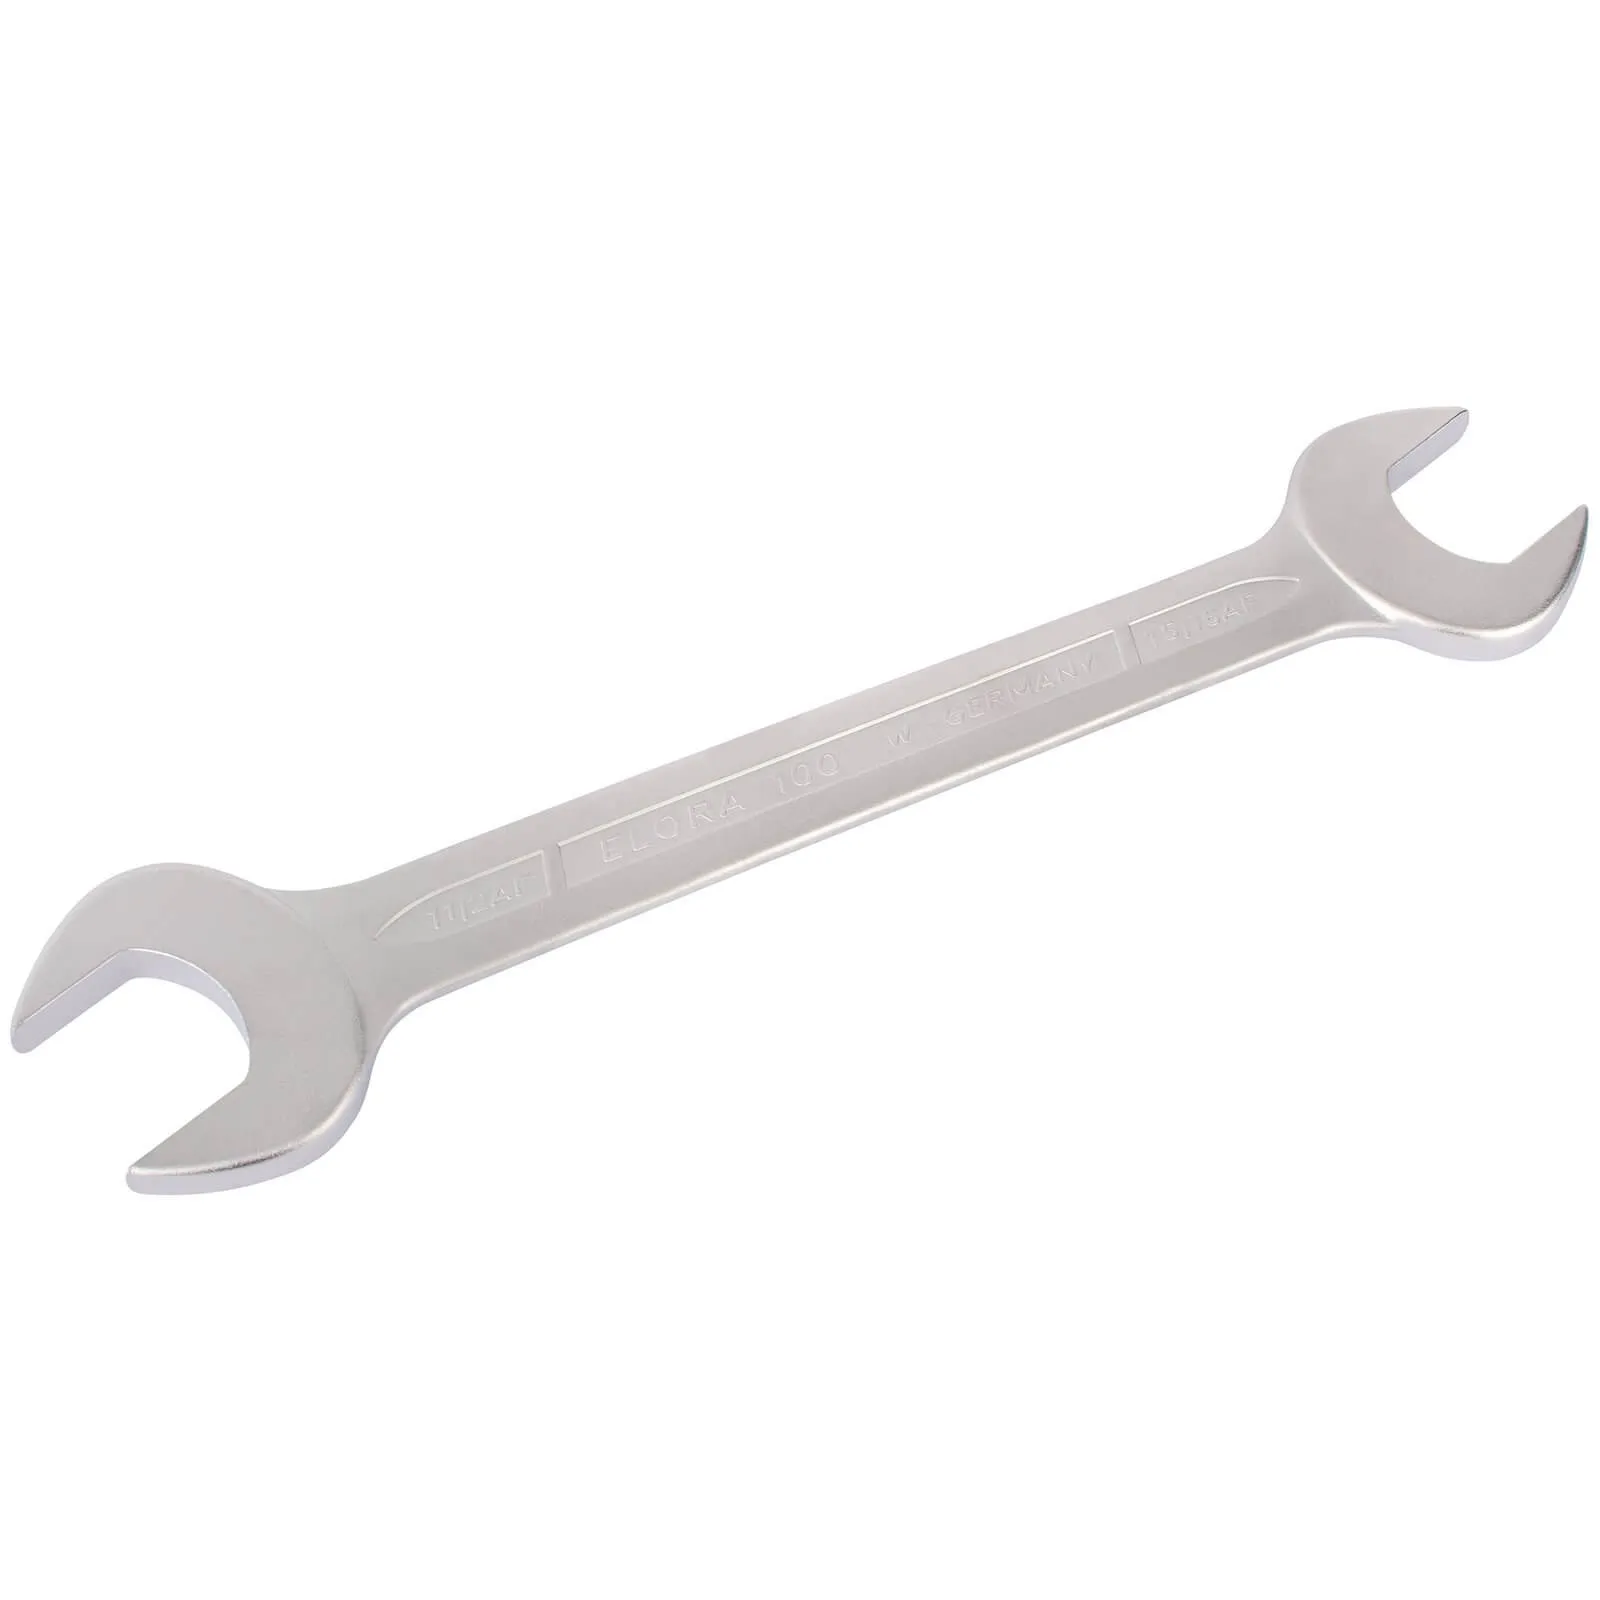 Elora Long Double Open End Spanner Imperial - 1" 5/16" x 1" 1/2"